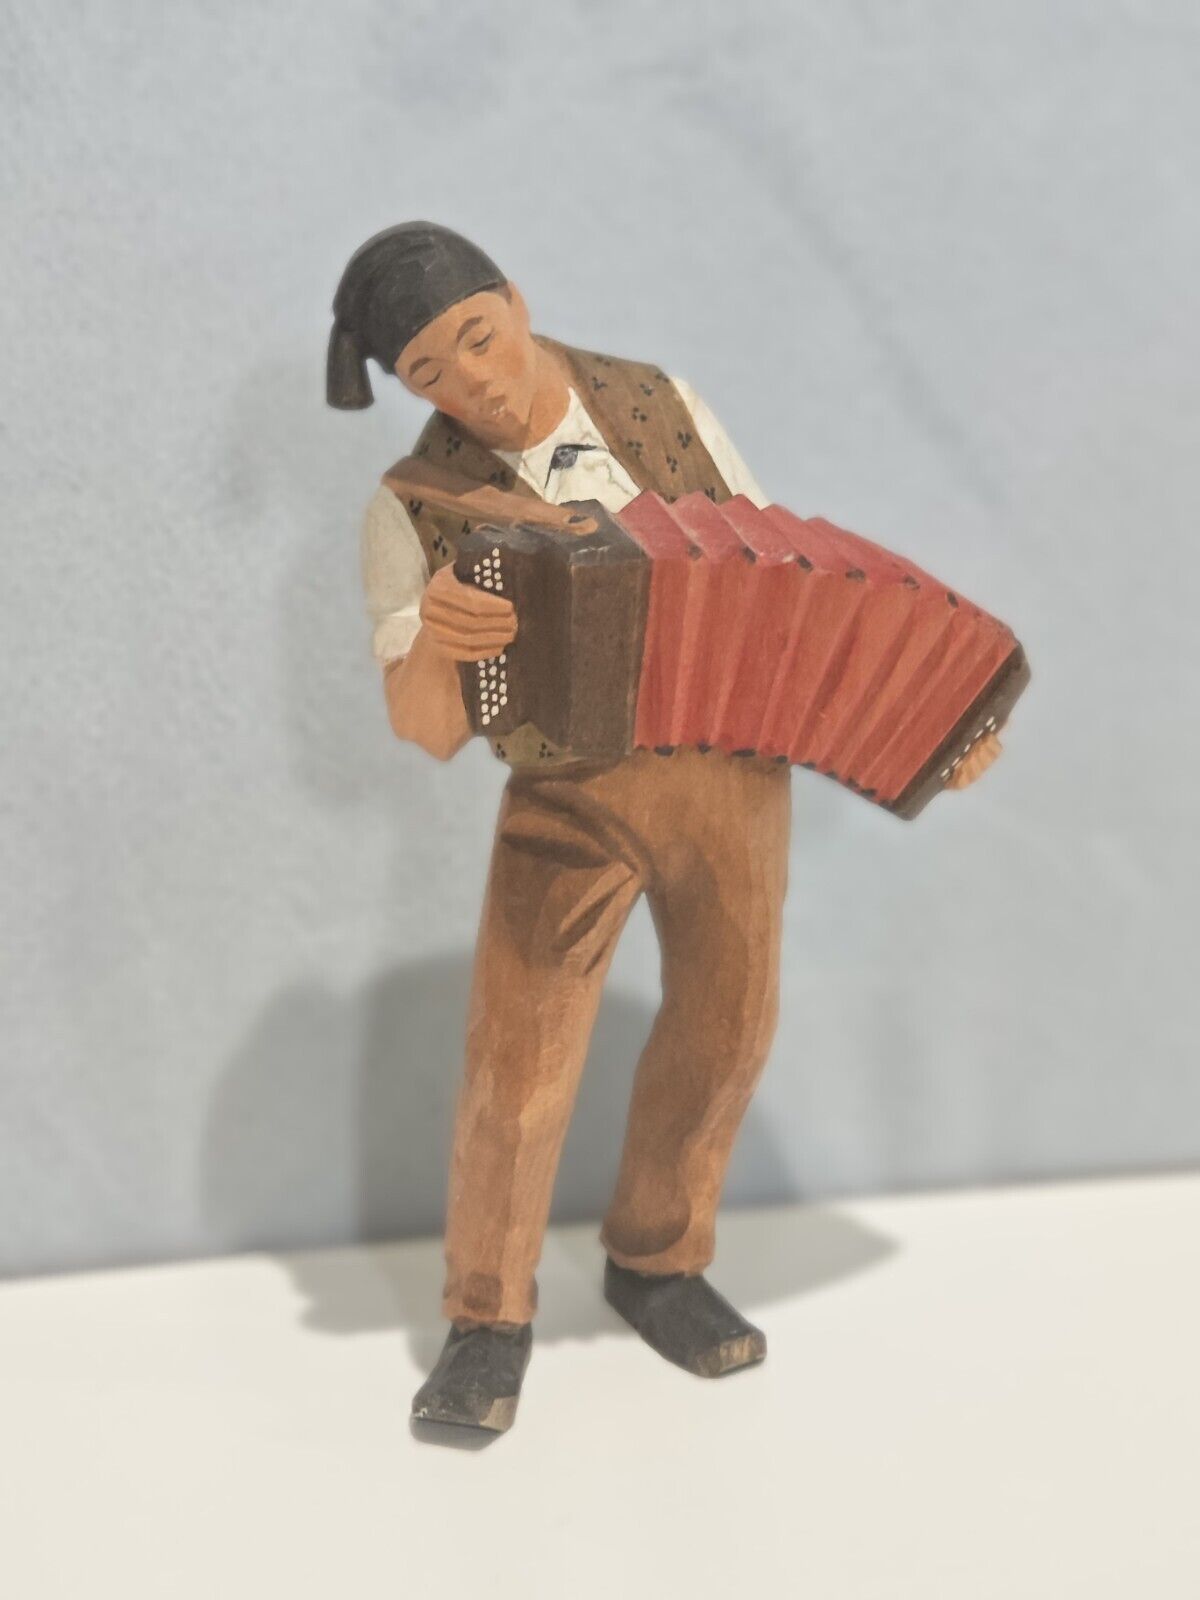 ⚡Vontage hand carved wooden figurine of an accordion player⚡